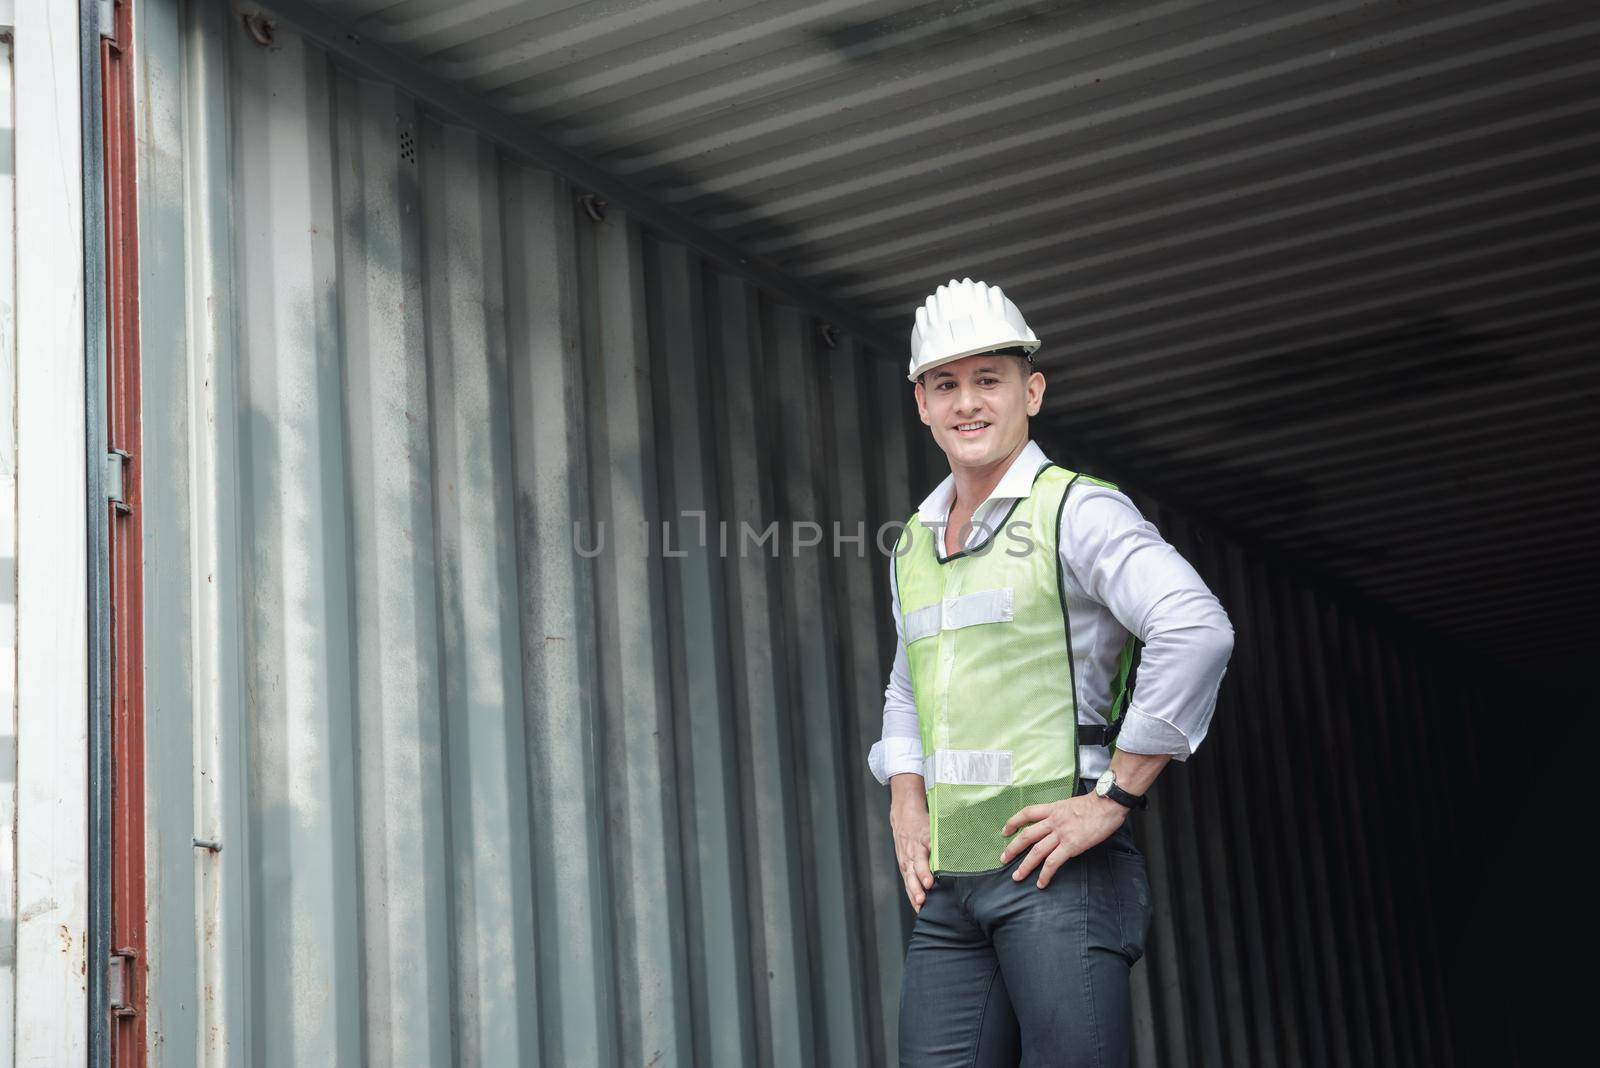 Container Logistics Shipping Management of Transportation Industry, Portrait of Transport Engineer Man Working Control Containers in Ship Yard. Business Cargo Ship Import/Export Factory Logistic.